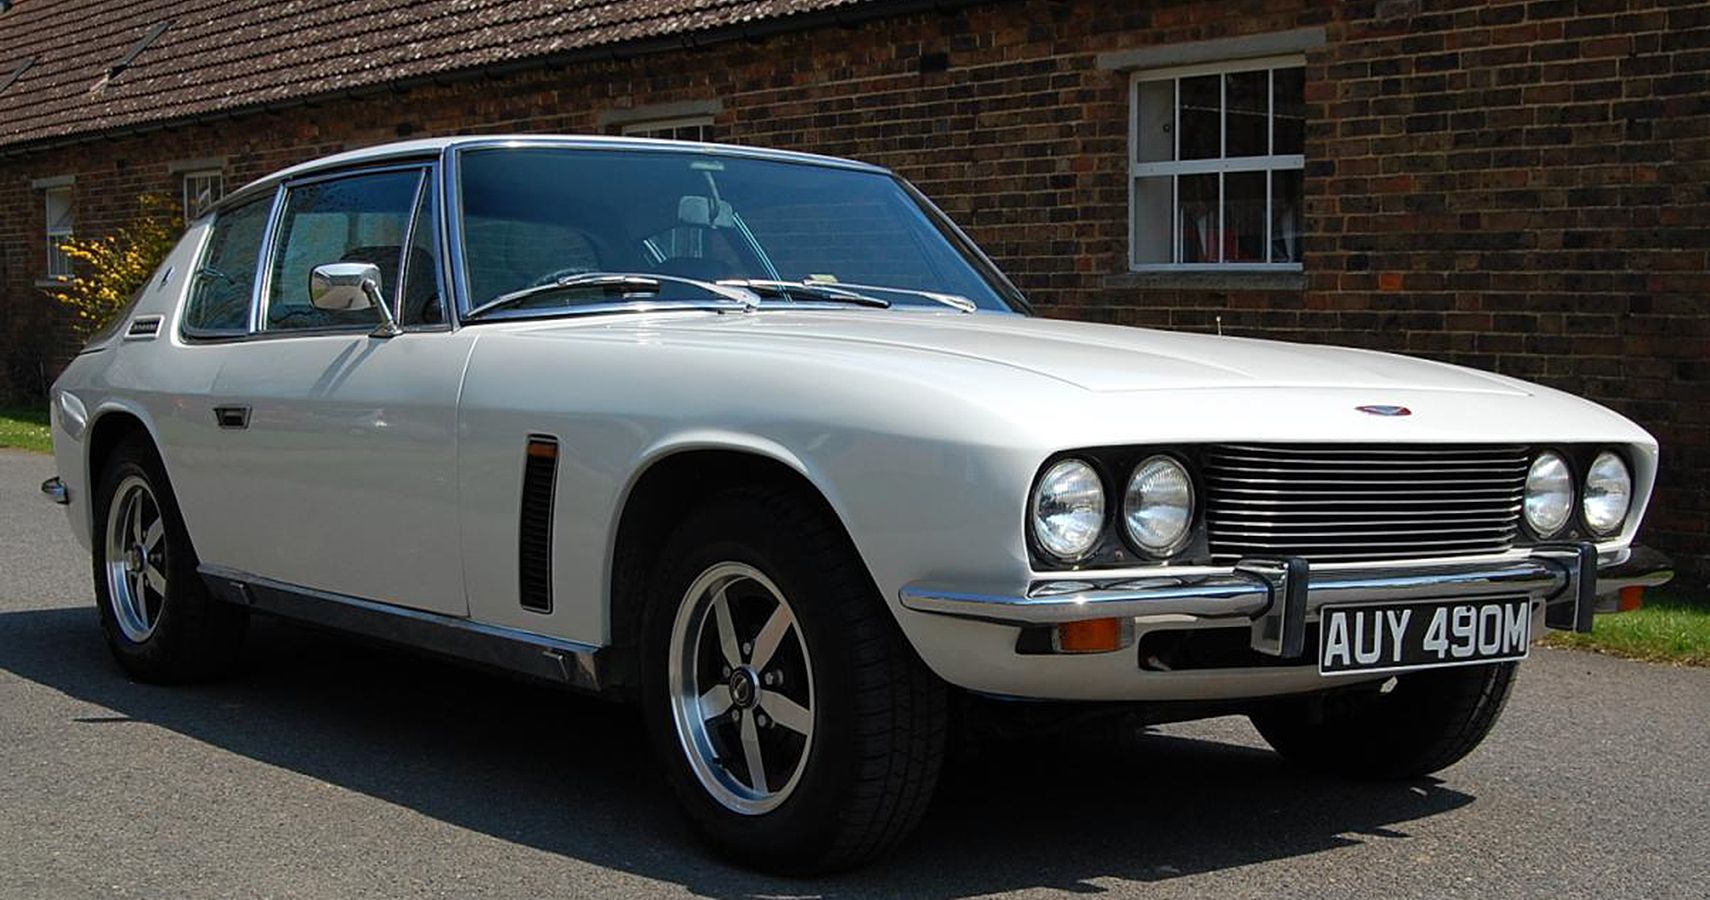 We Badly Want: The Jensen Interceptor From UK